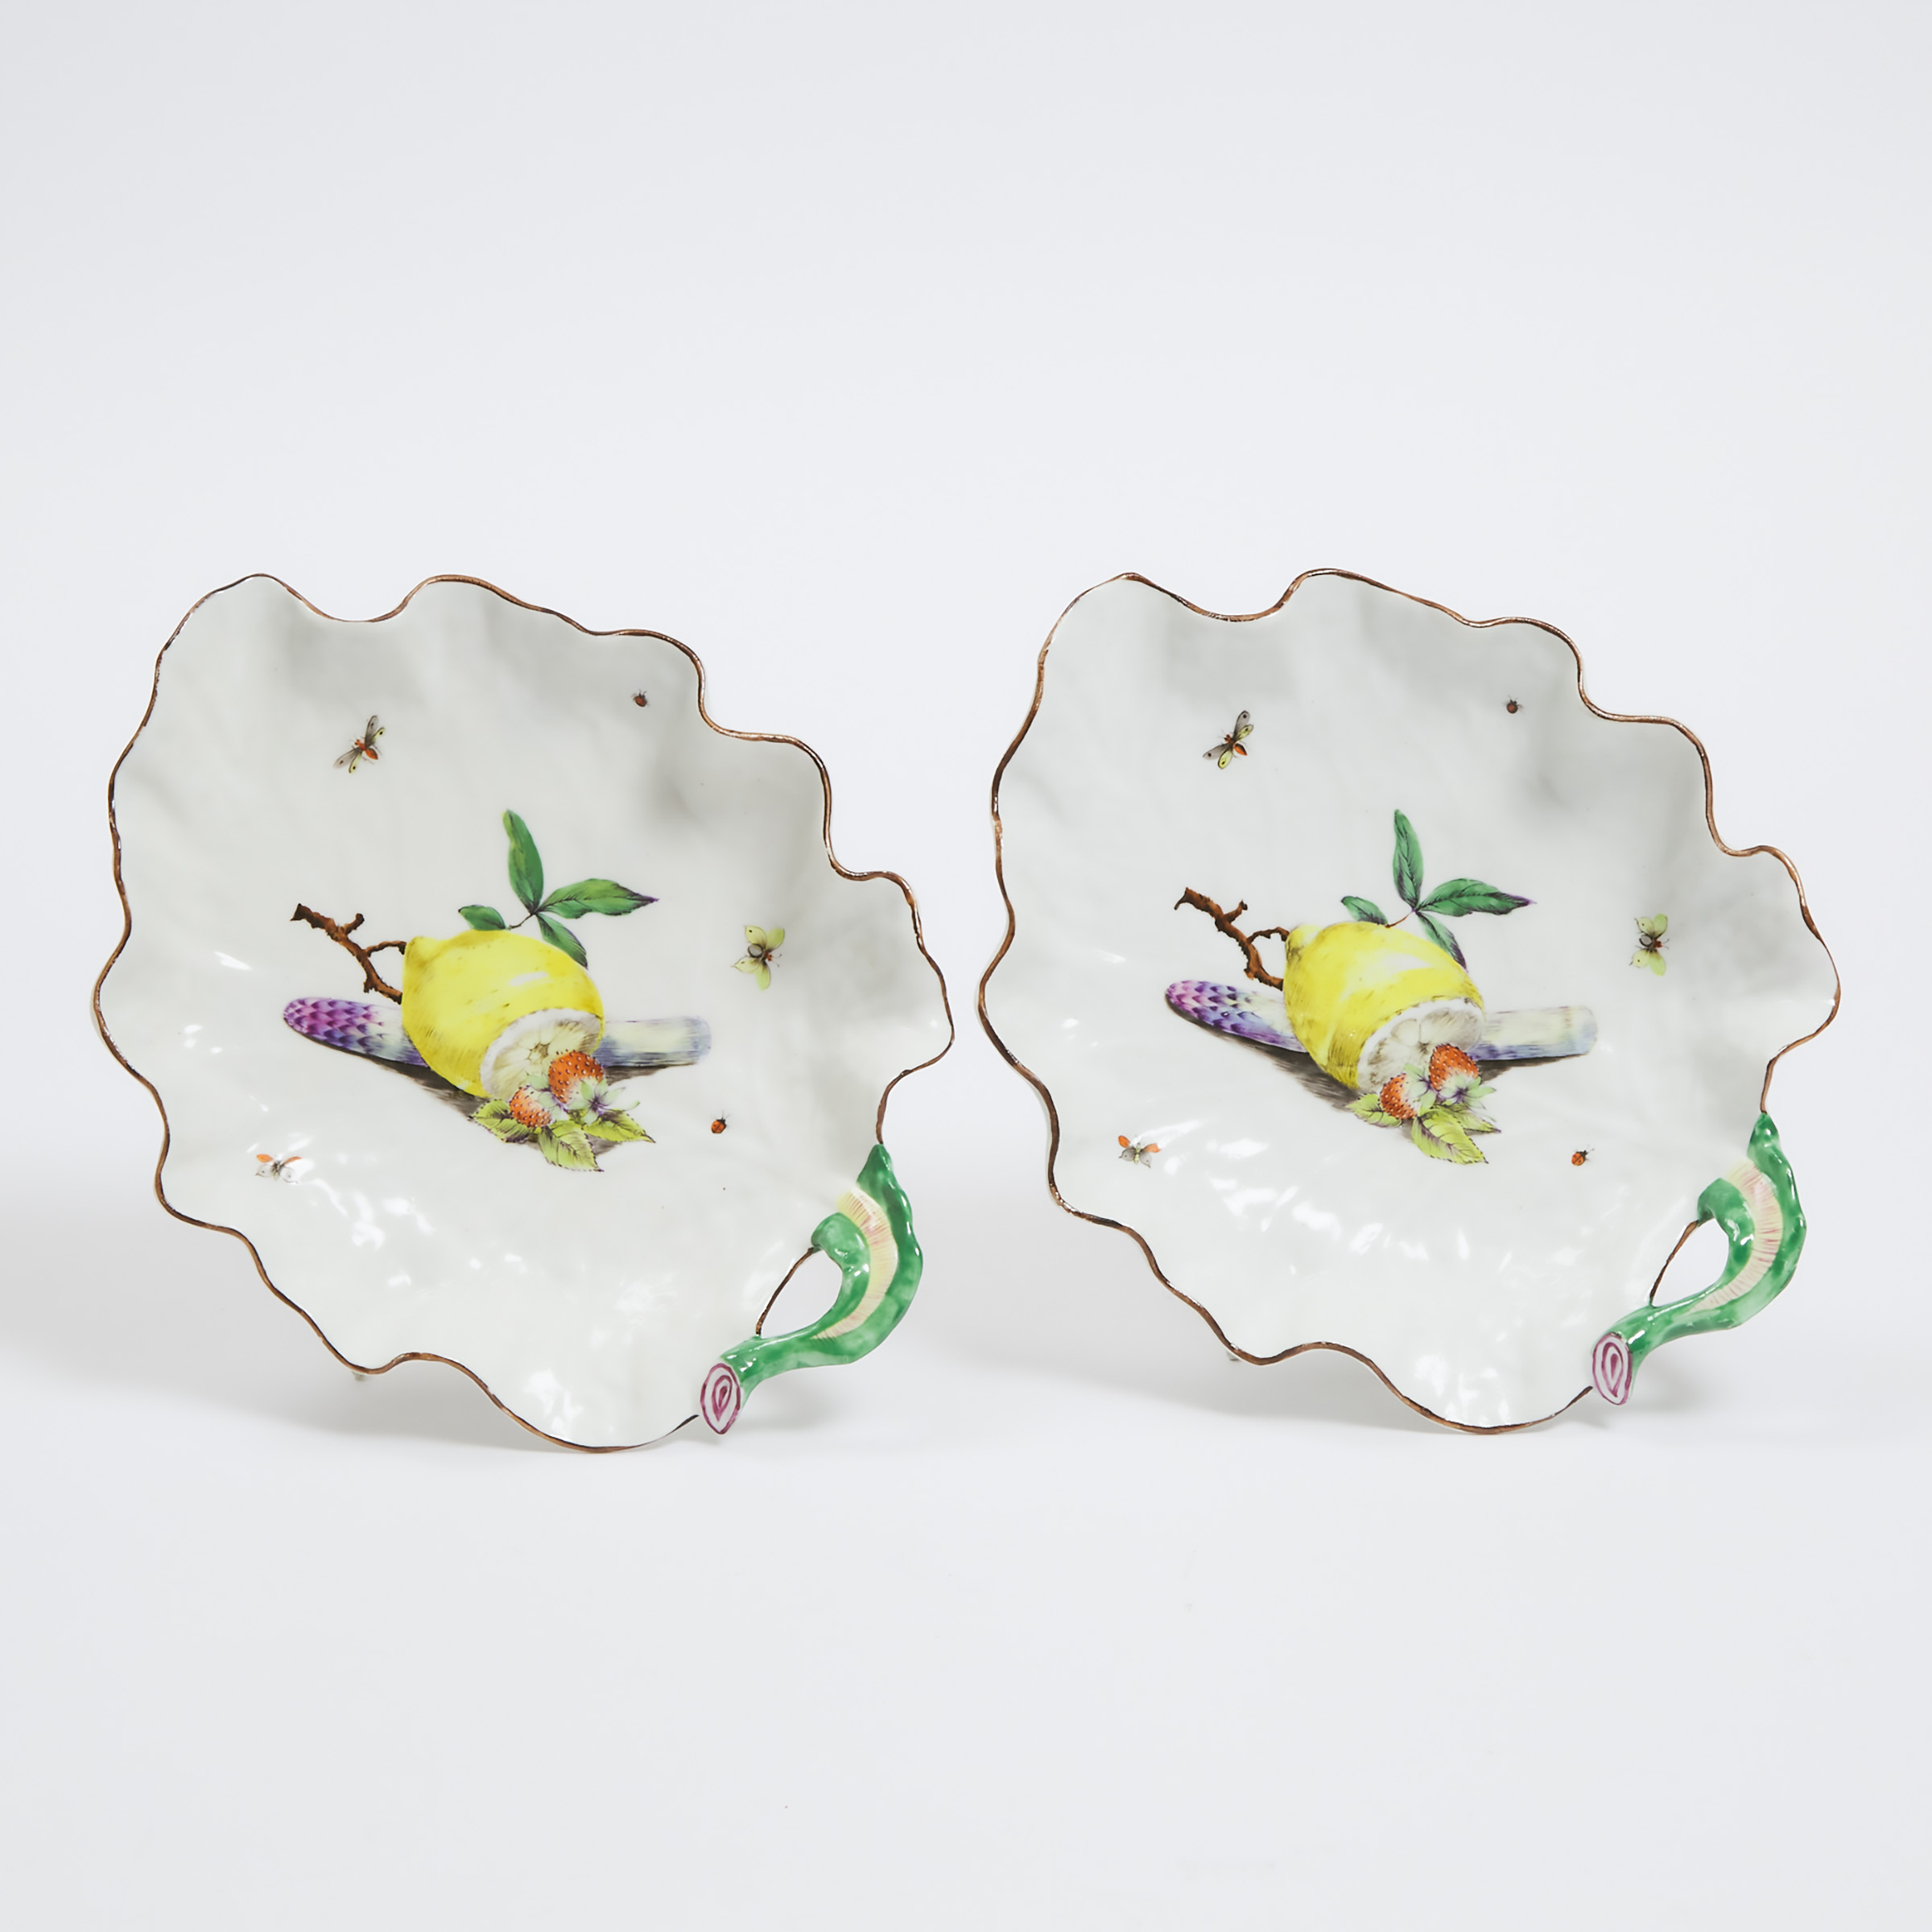 Pair of French Porcelain Leaf Dishes, probably Samson, late 19th century